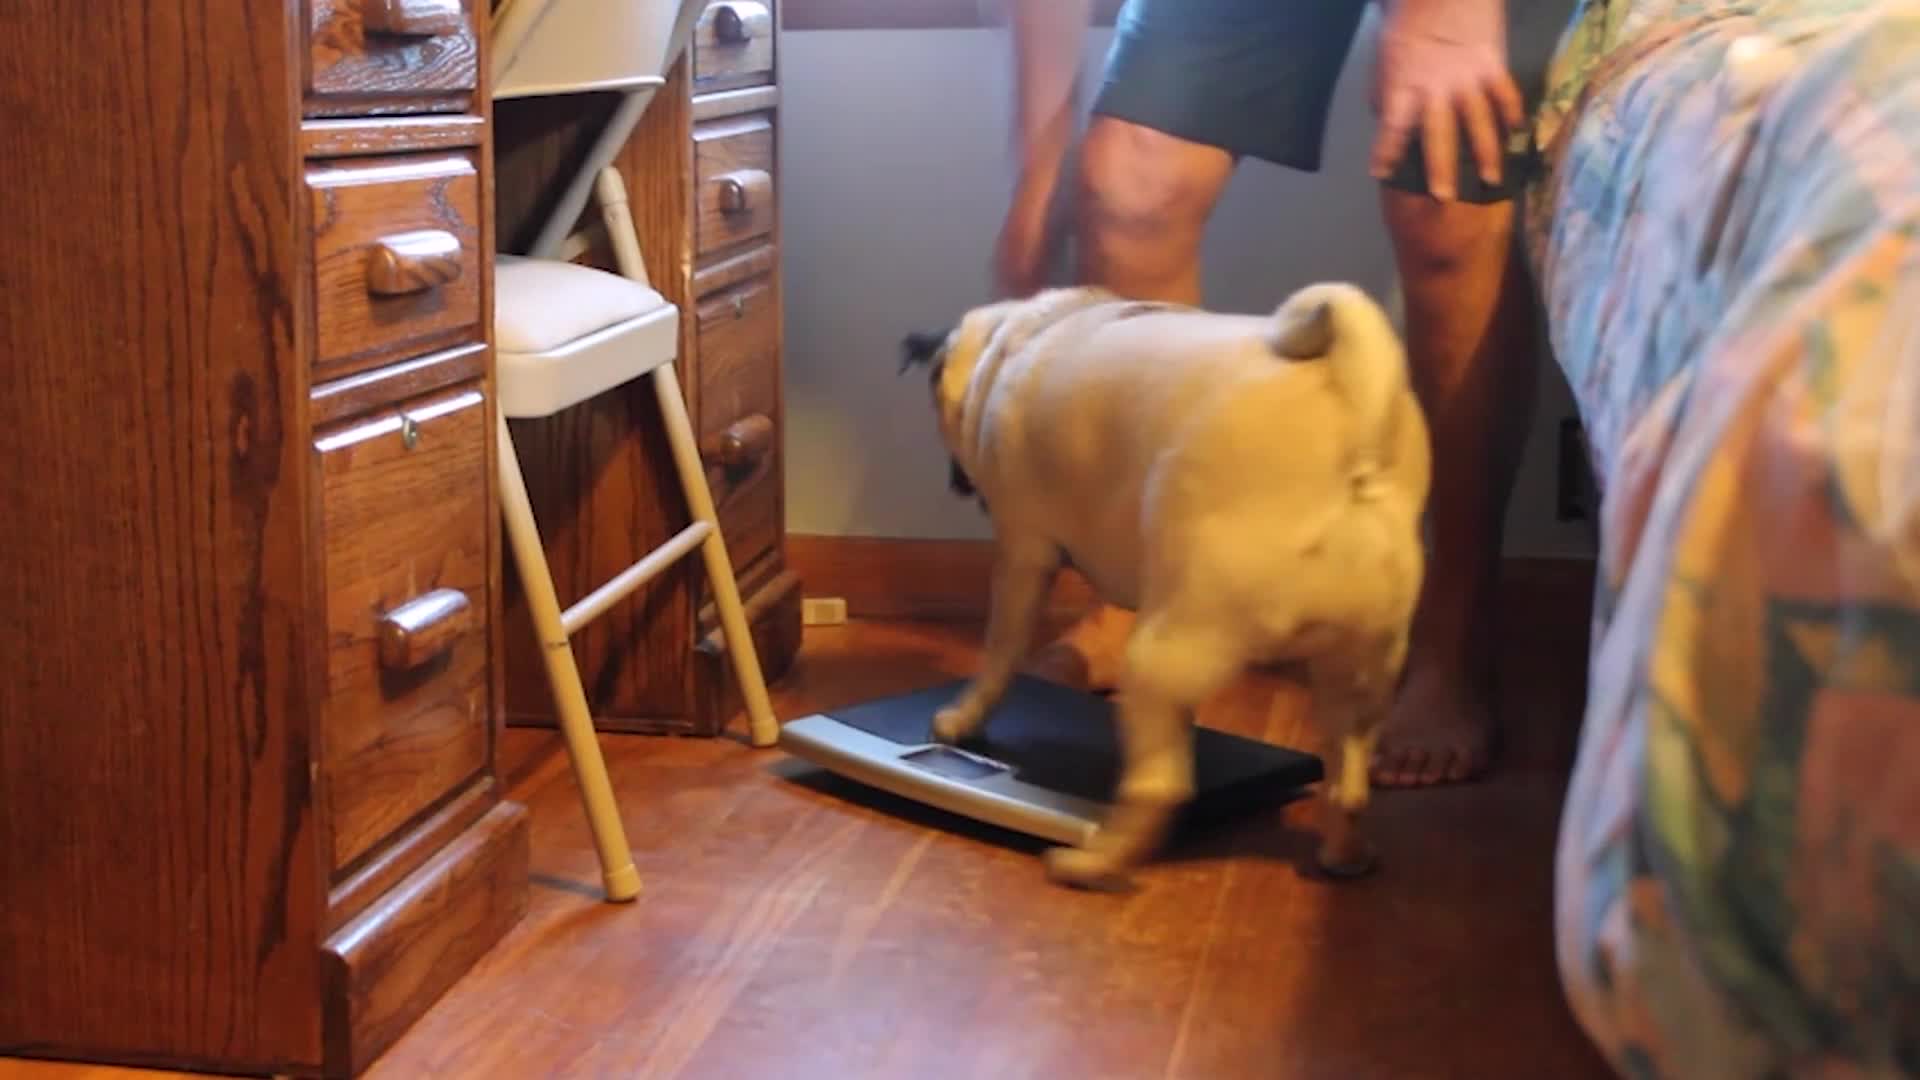 Pug fights over a scale